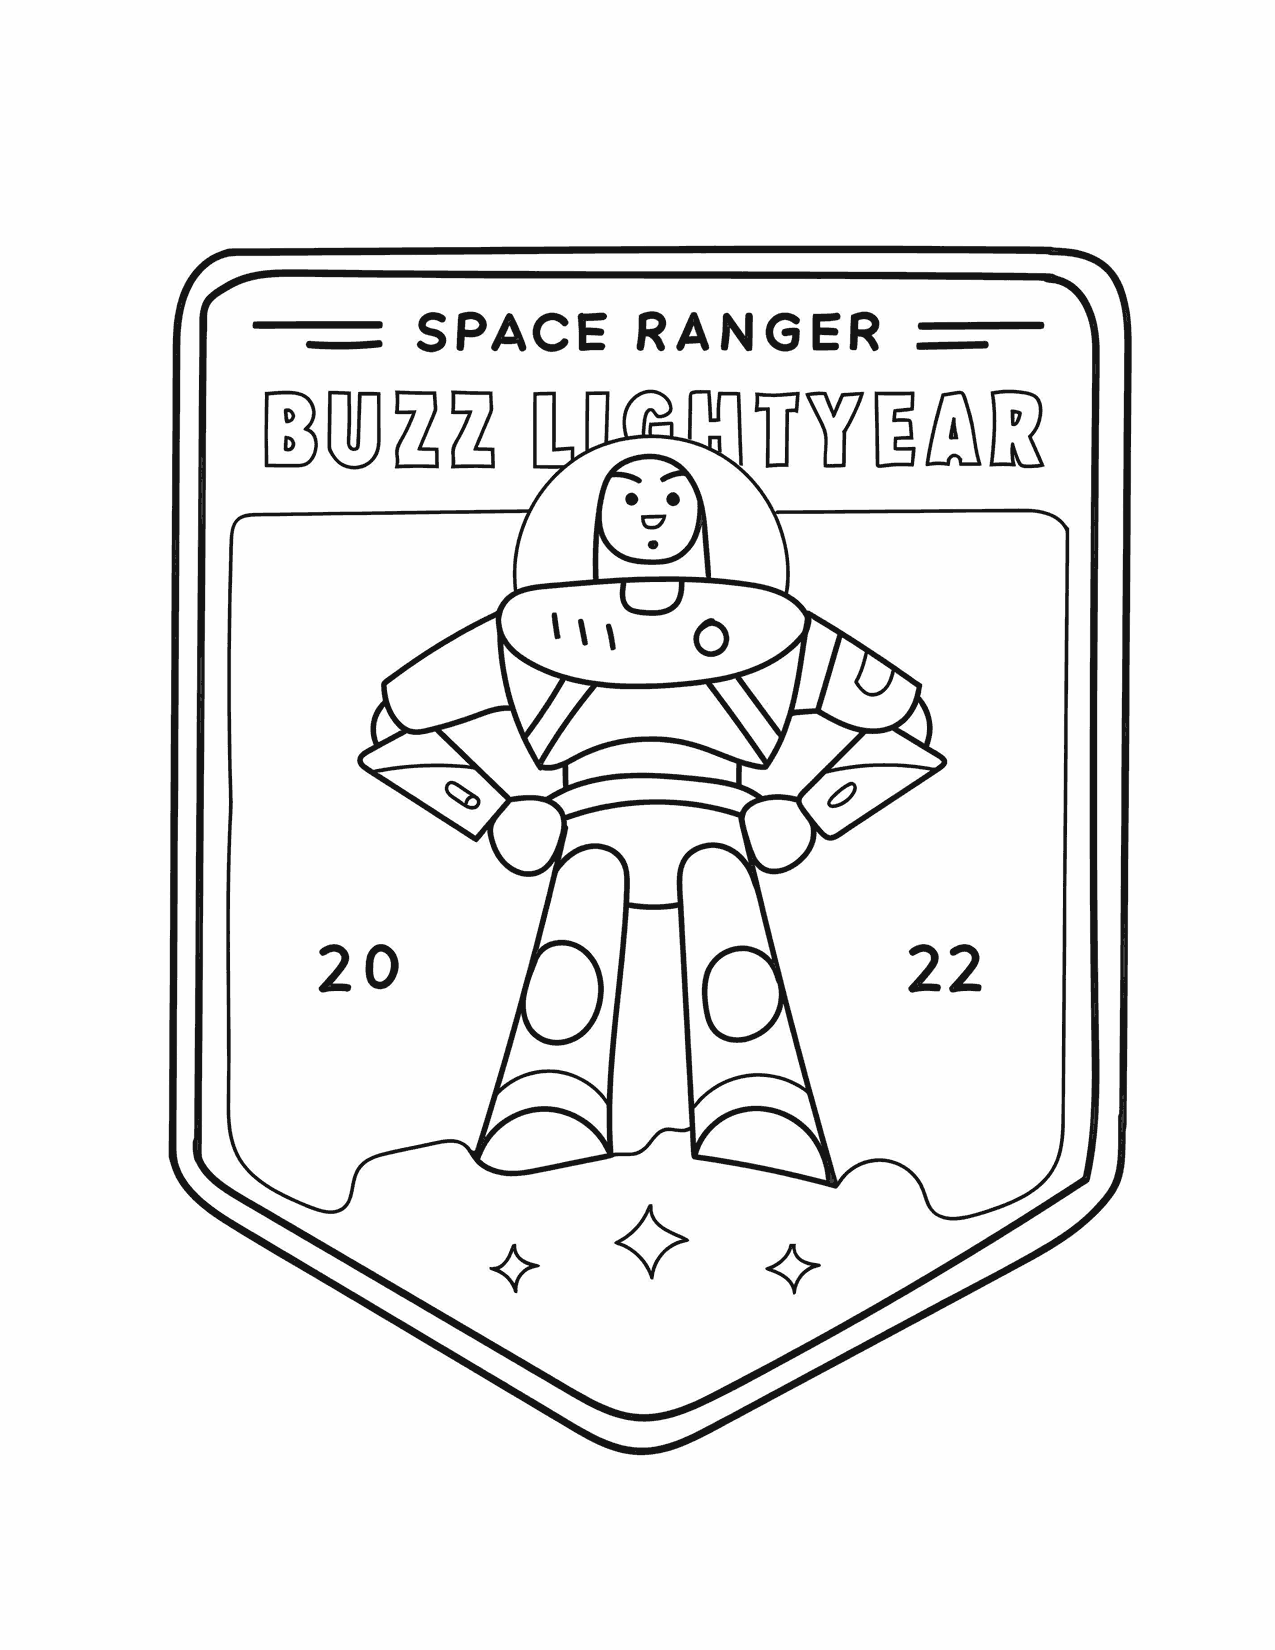 Buzz Lightyear Patch Coloring Page